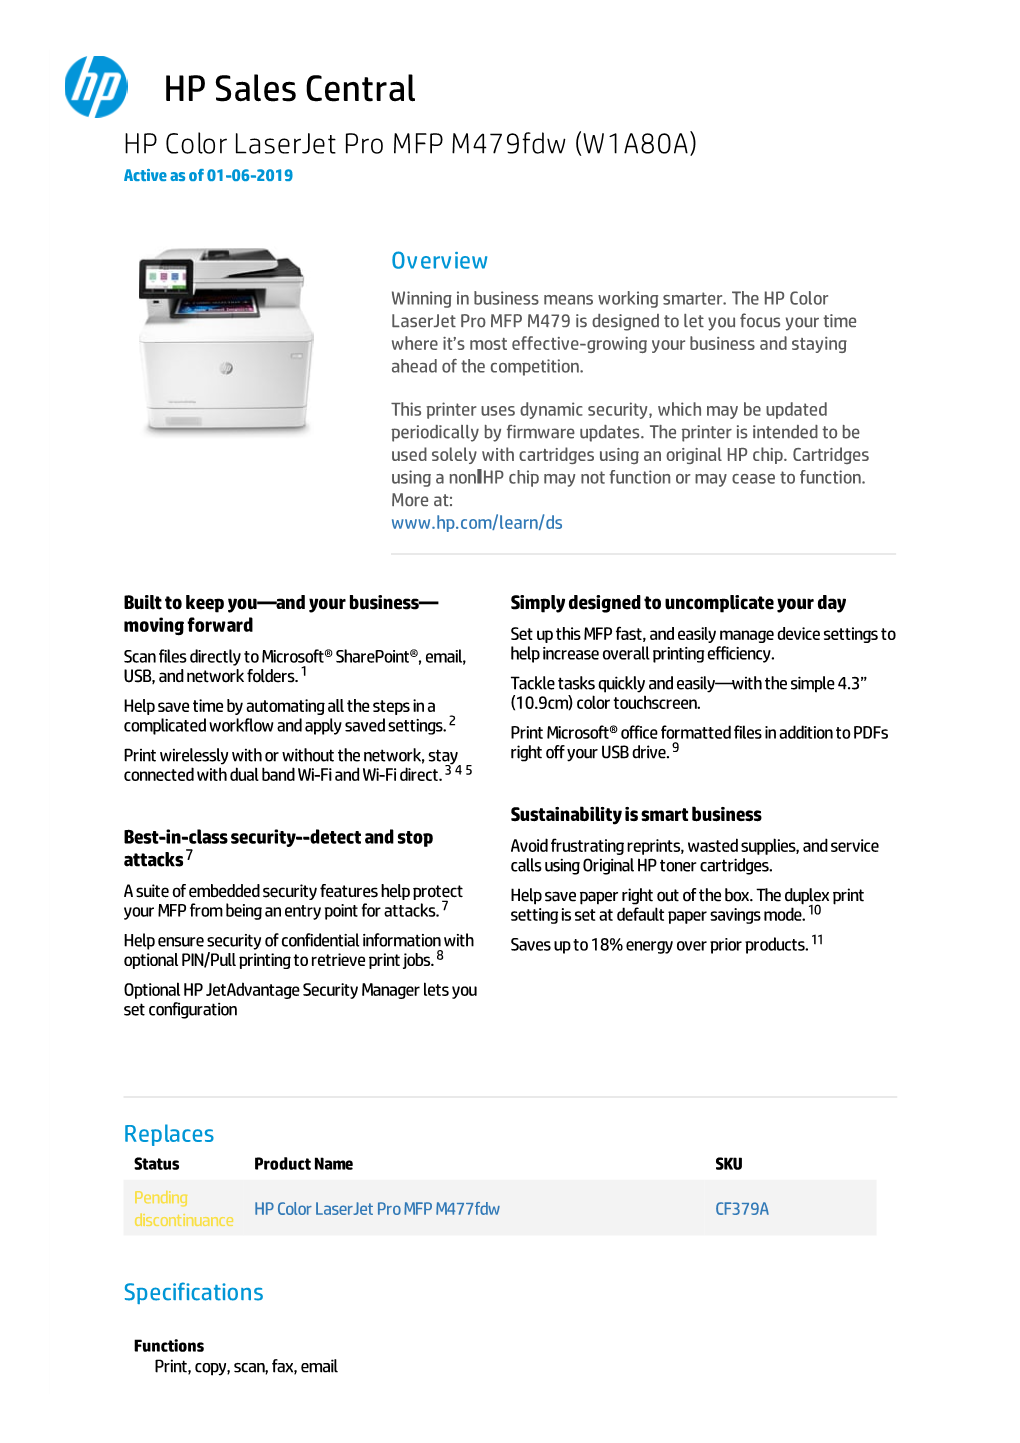 HP Sales Central HP Color Laserjet Pro MFP M479fdw (W1A80A) Active As of 01-06-2019